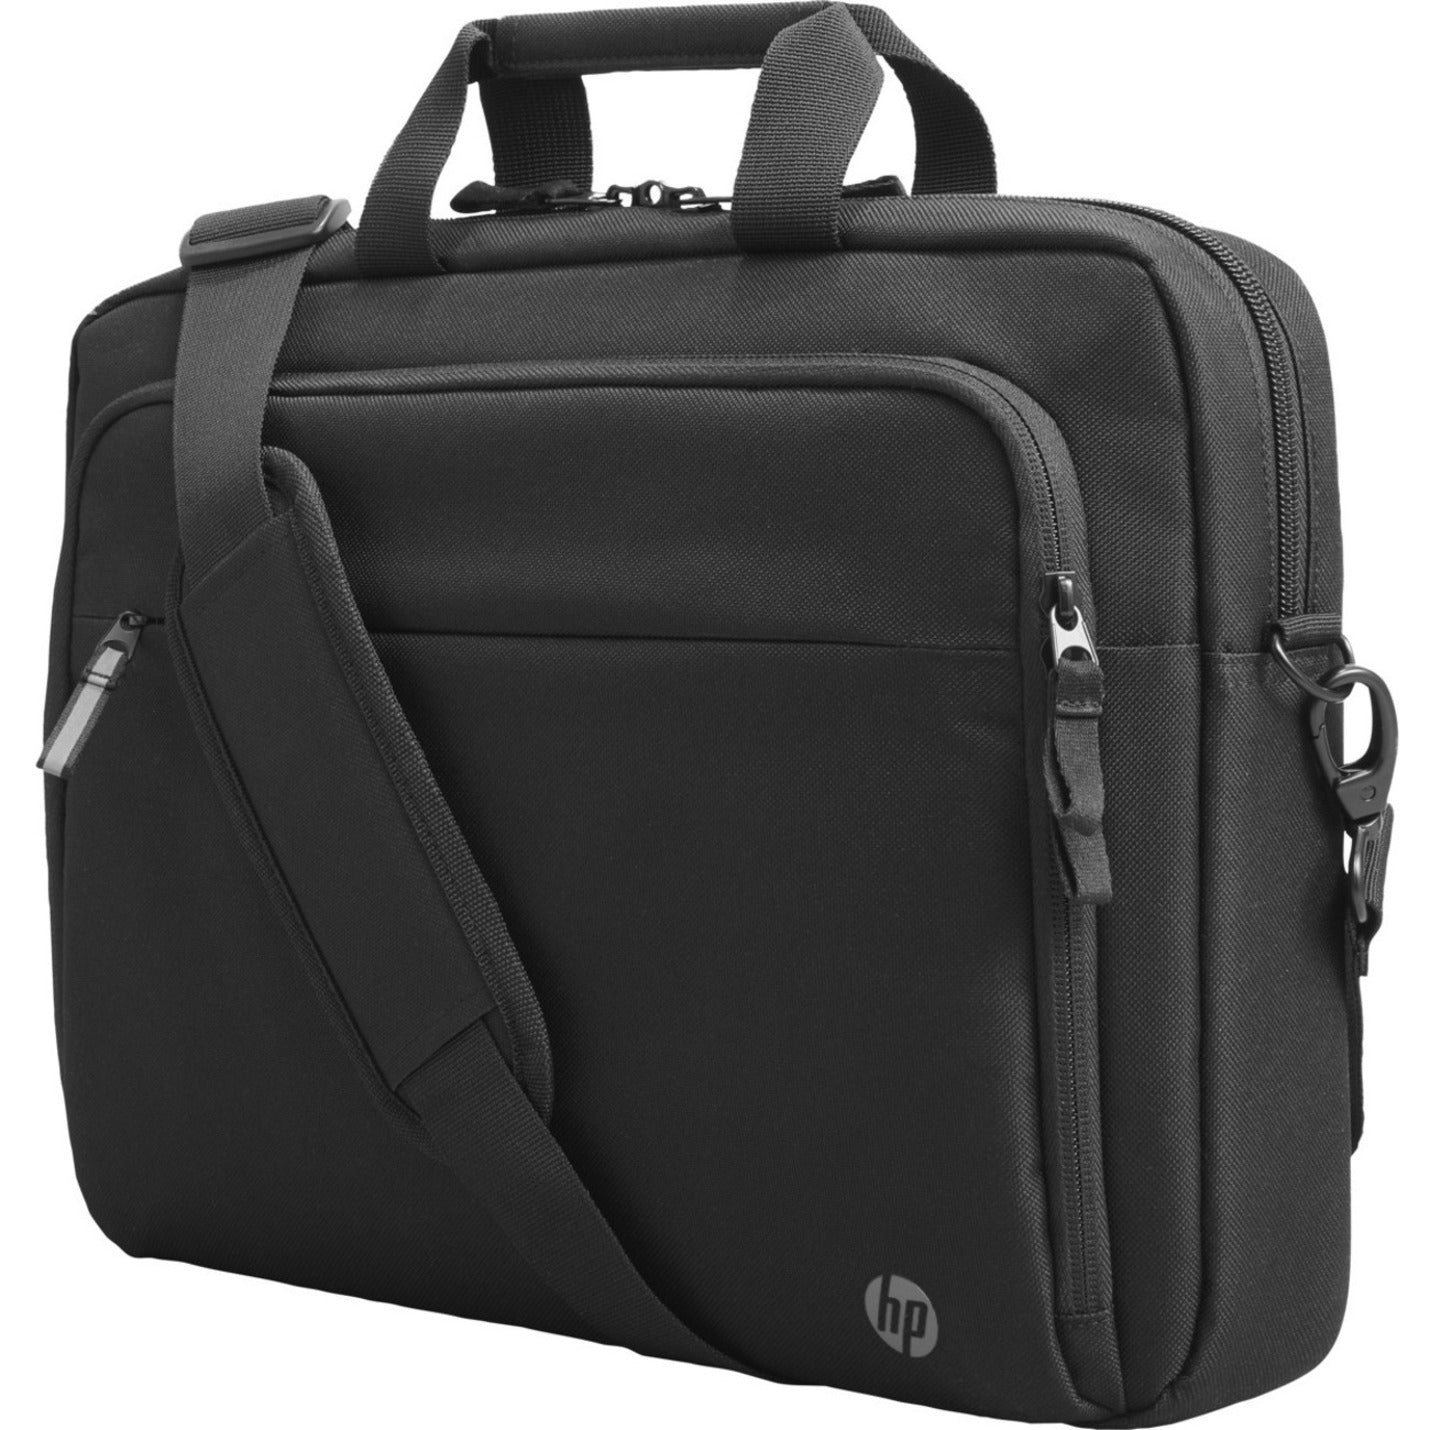 HP 3E5F8UT Renew Business 15.6-inch Laptop Bag, Sleeve, Water Resistant, Trolley Strap, Shoulder Strap, Handle